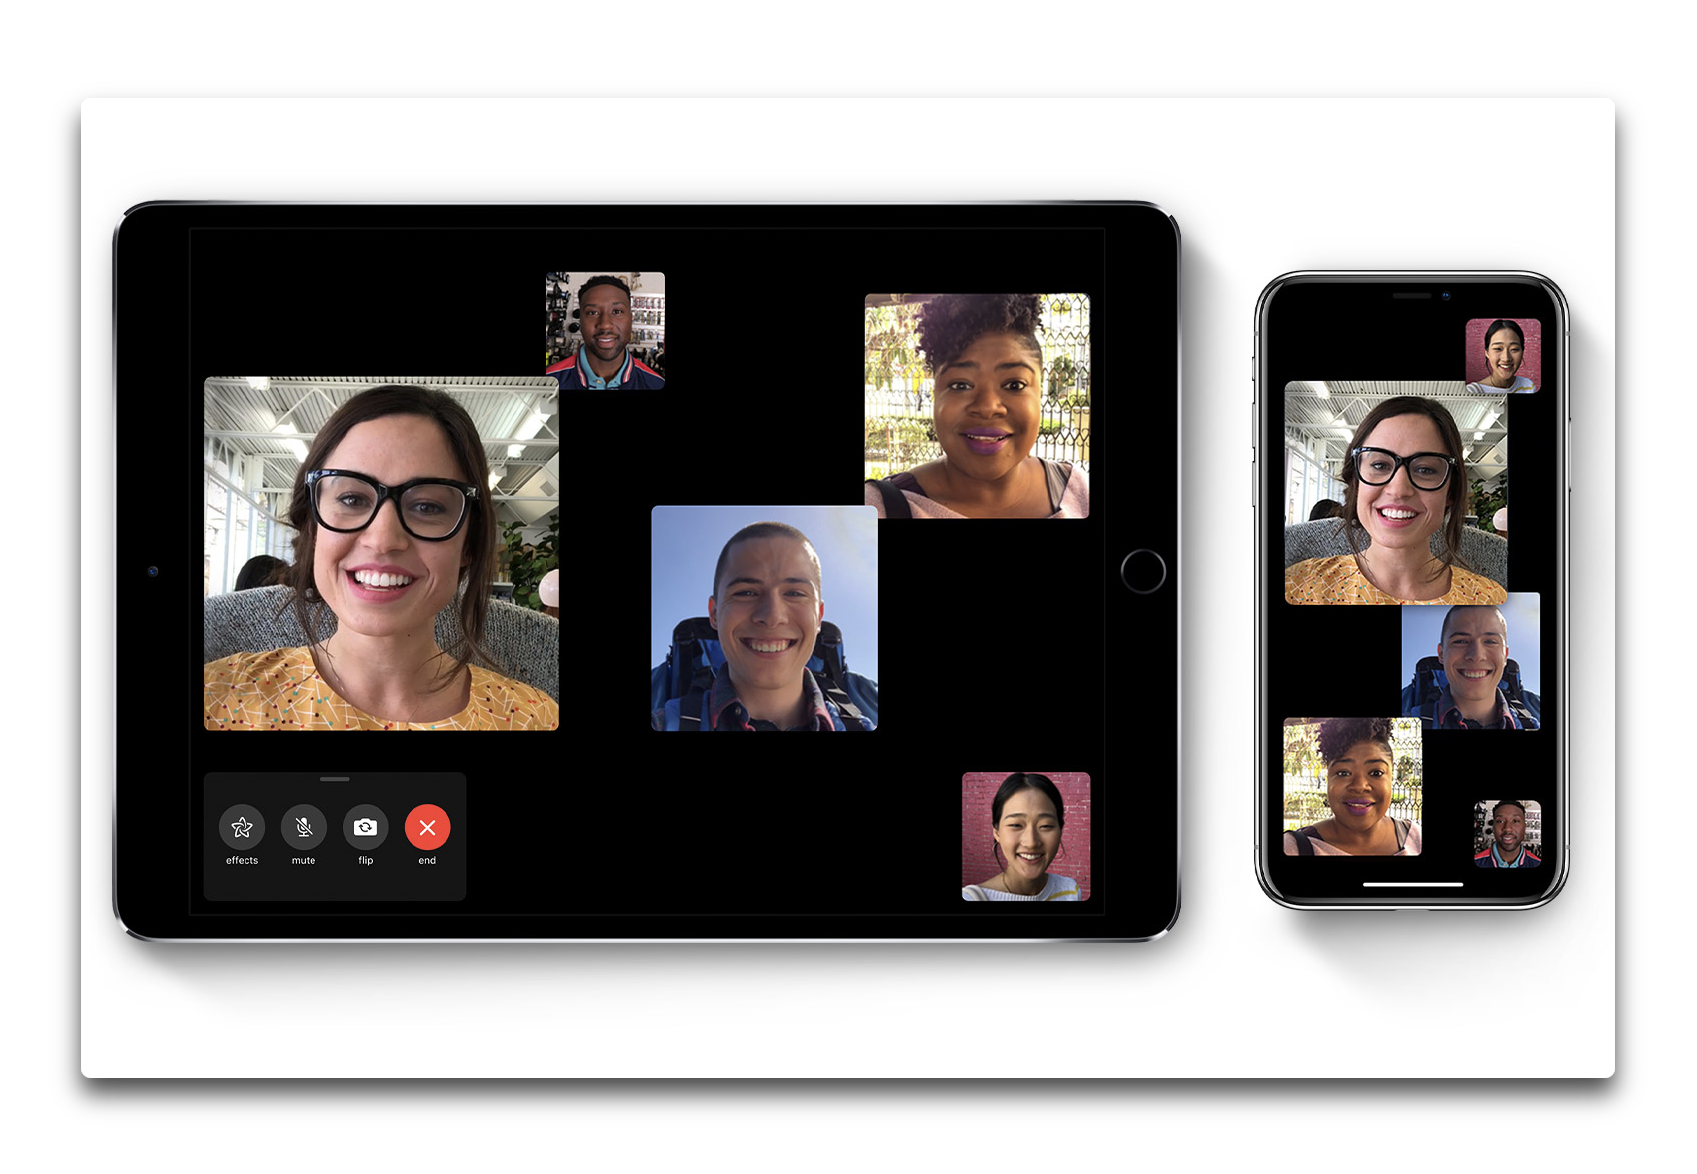 Apple、Group FaceTime機能を「iOS 12.1.4」リリース後に再度有効化